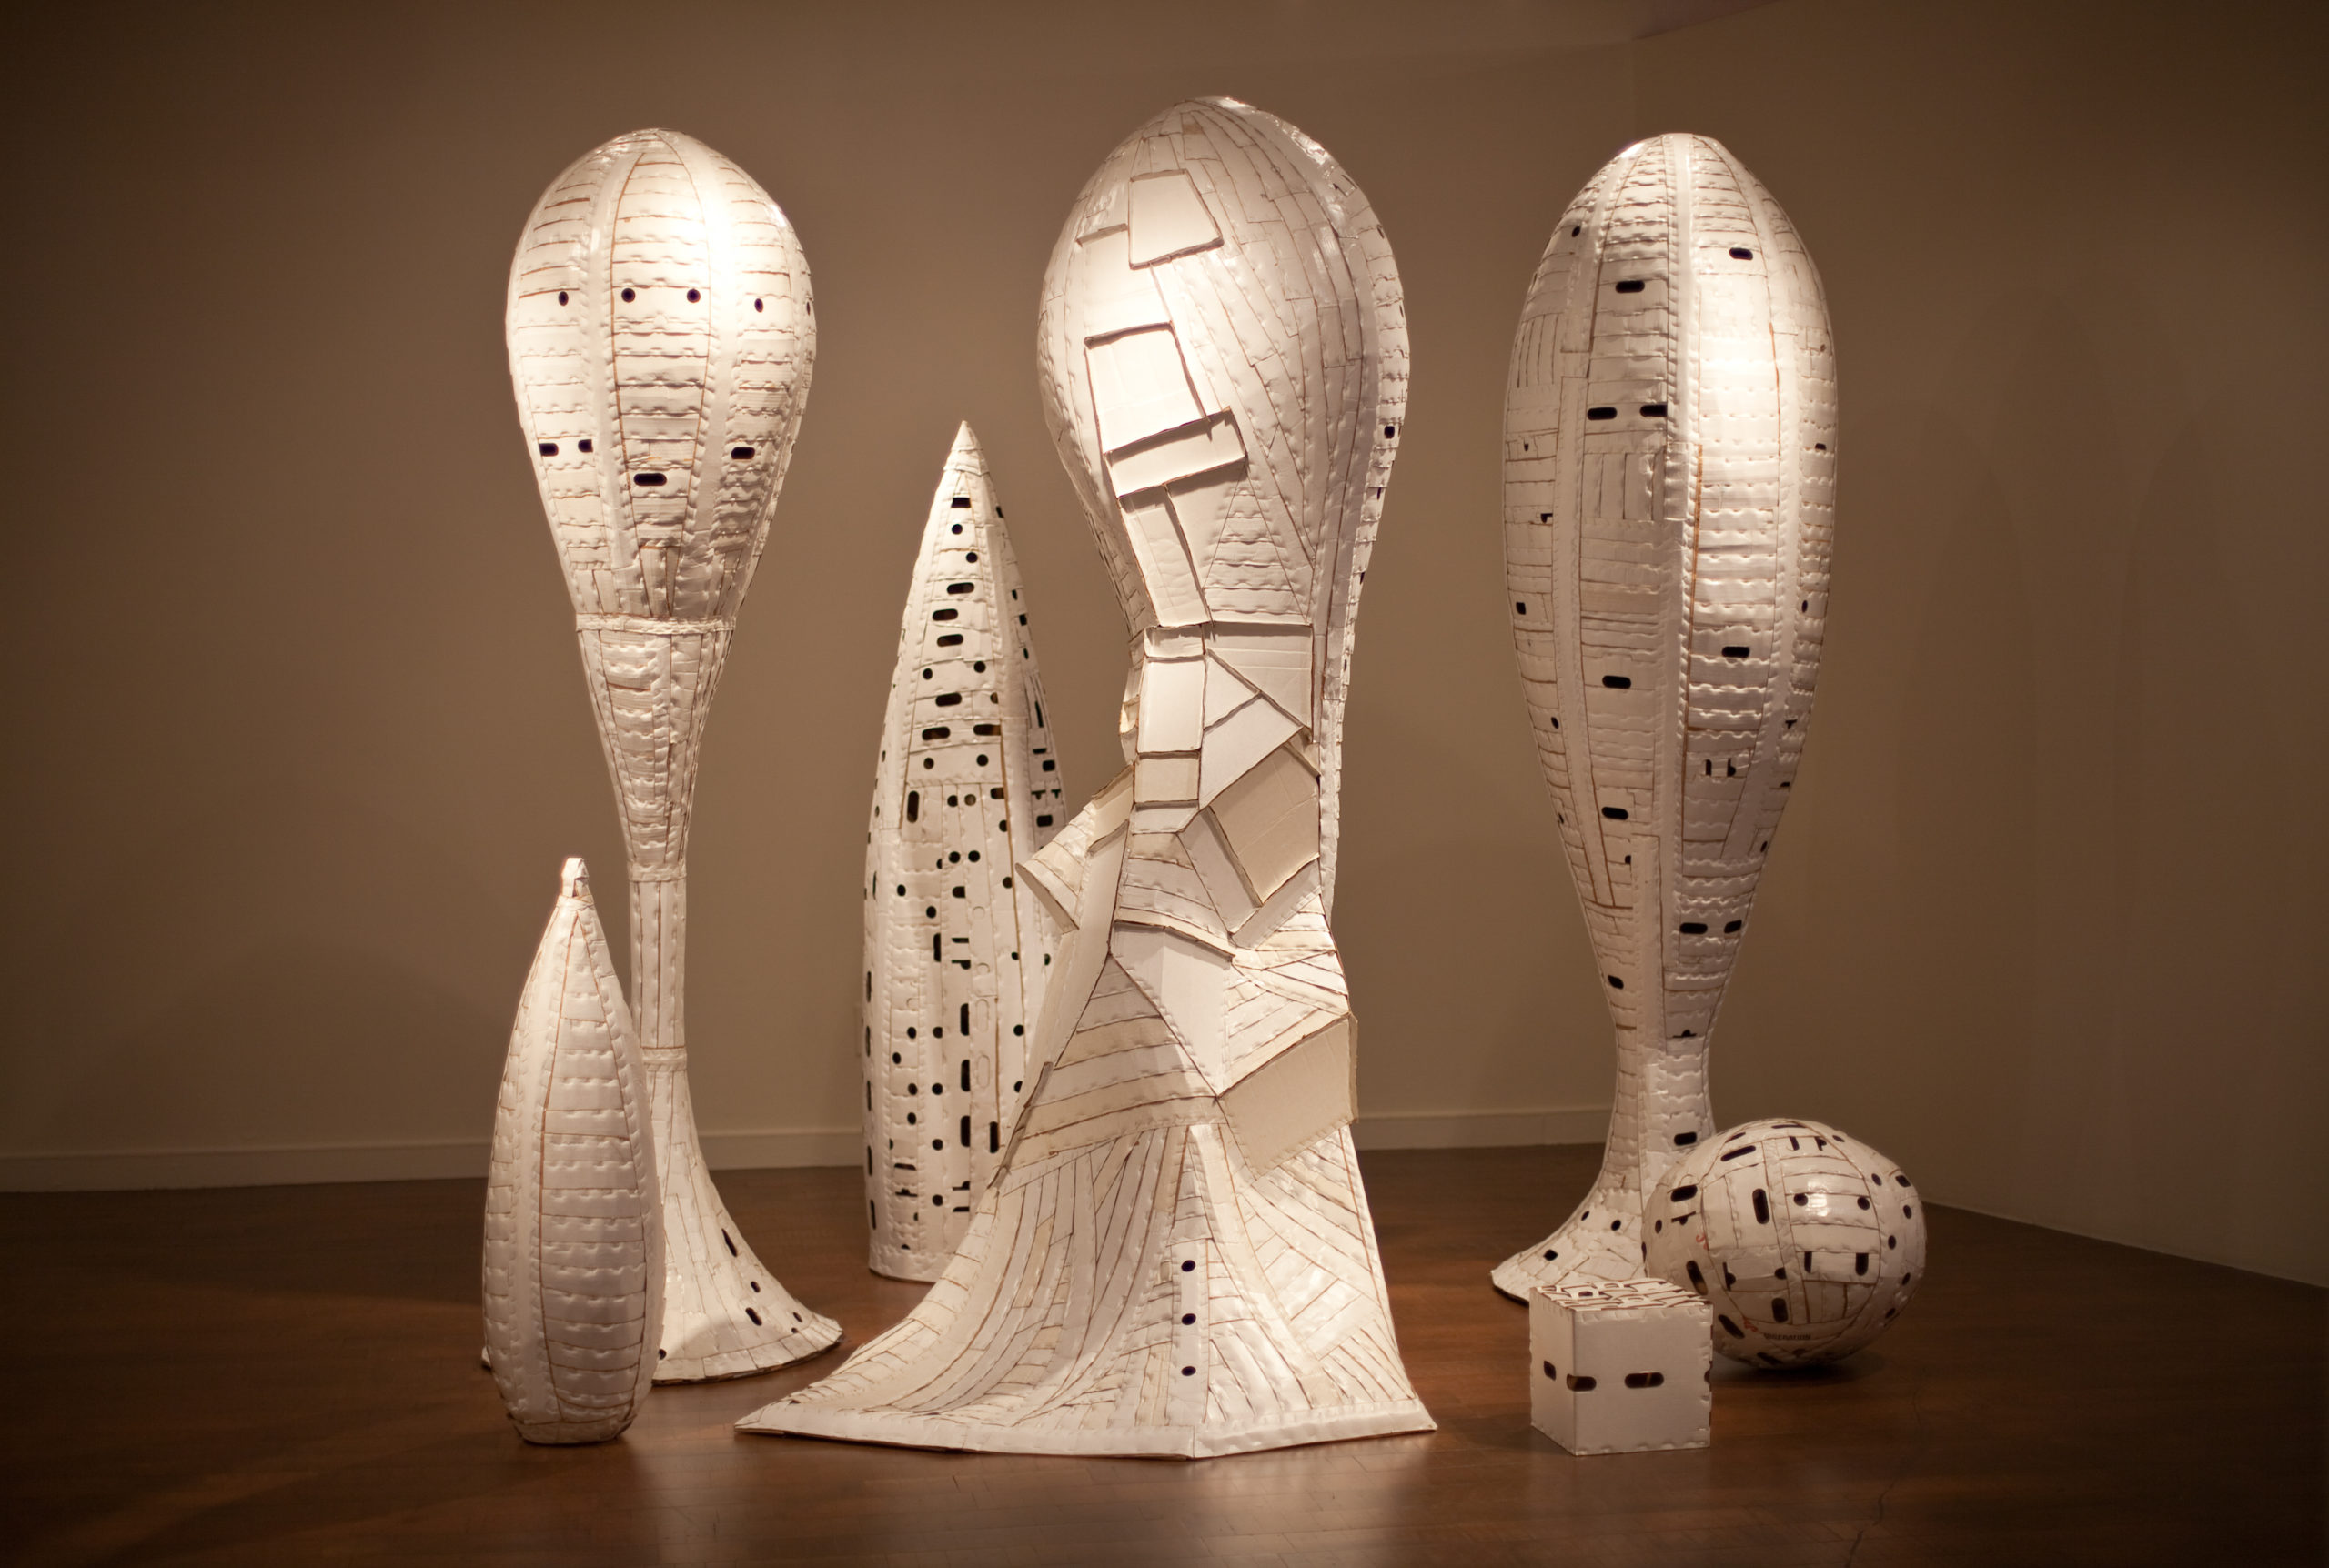 Ann Weber, The Wedding Party, 2009. Found cardboard, staples, polyurethane, variable dimensions. Courtesy of the artists.